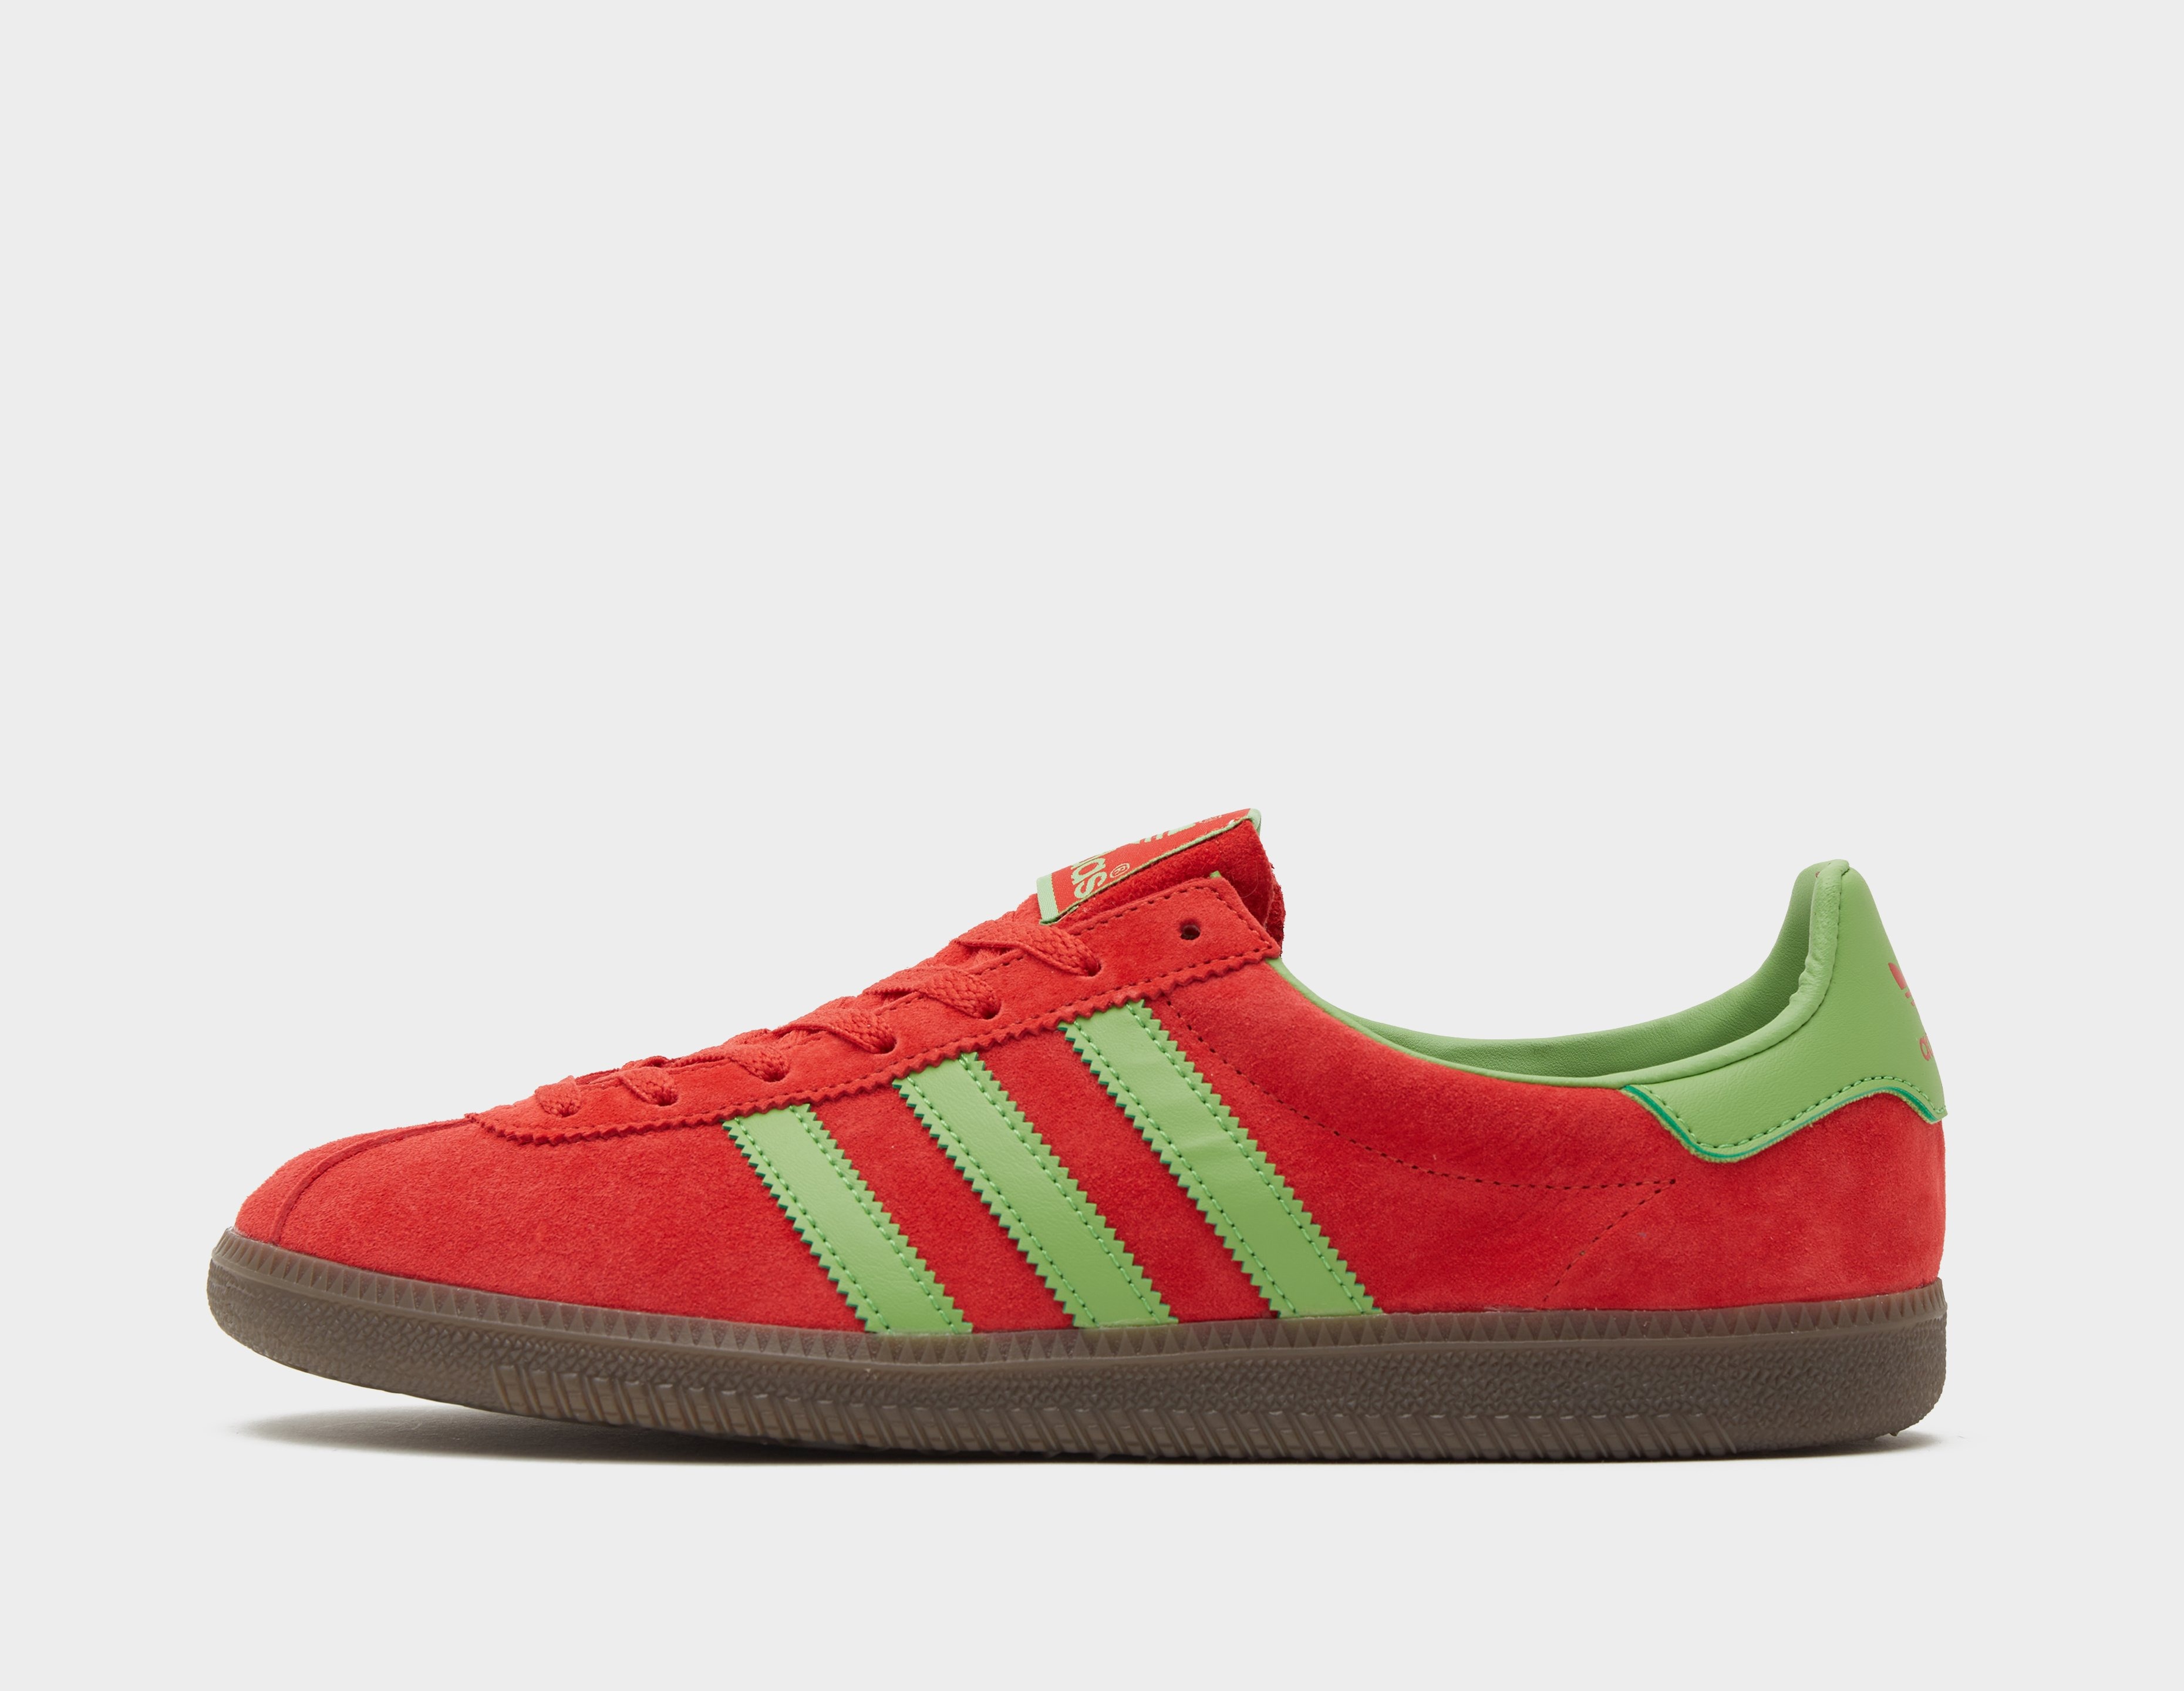 adidas custom state shoes store sale today 2018 - SBD - adidas custom state  shoes store sale today 2018 2021 GZ0066 Release Date